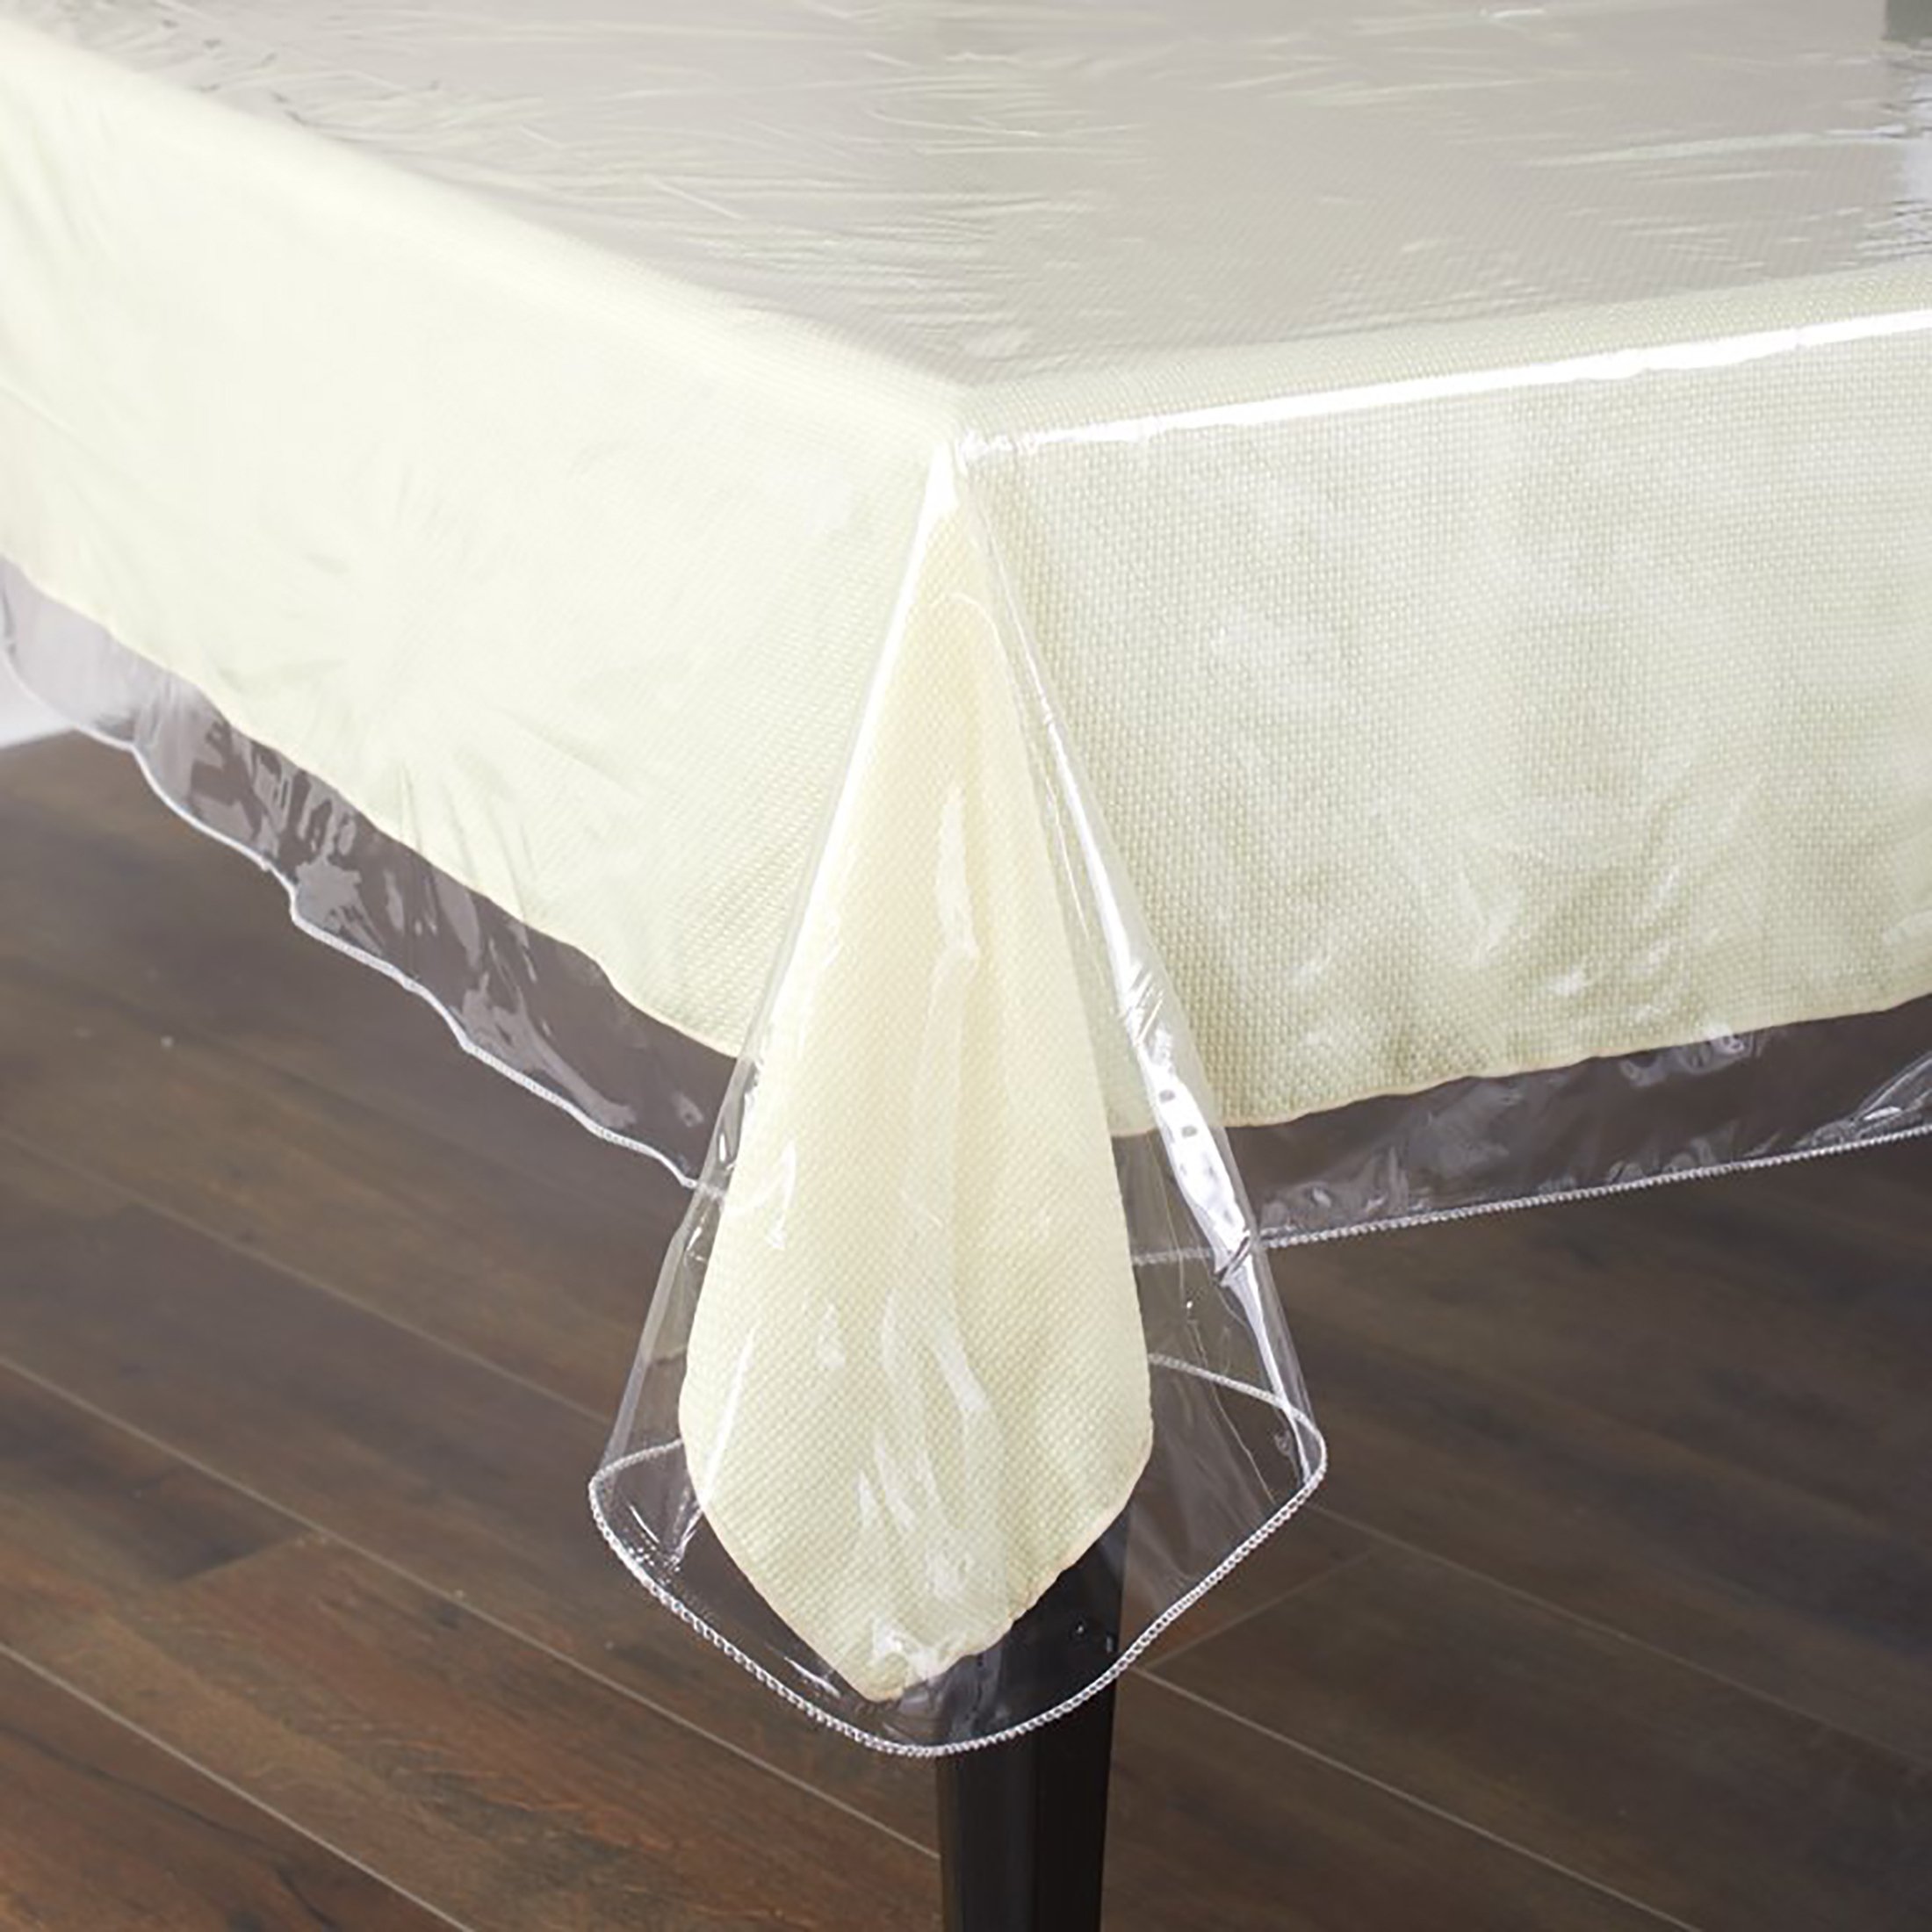 Waterproof Window Clear Vinyl Tablecloth Protector Oblong - 54x72